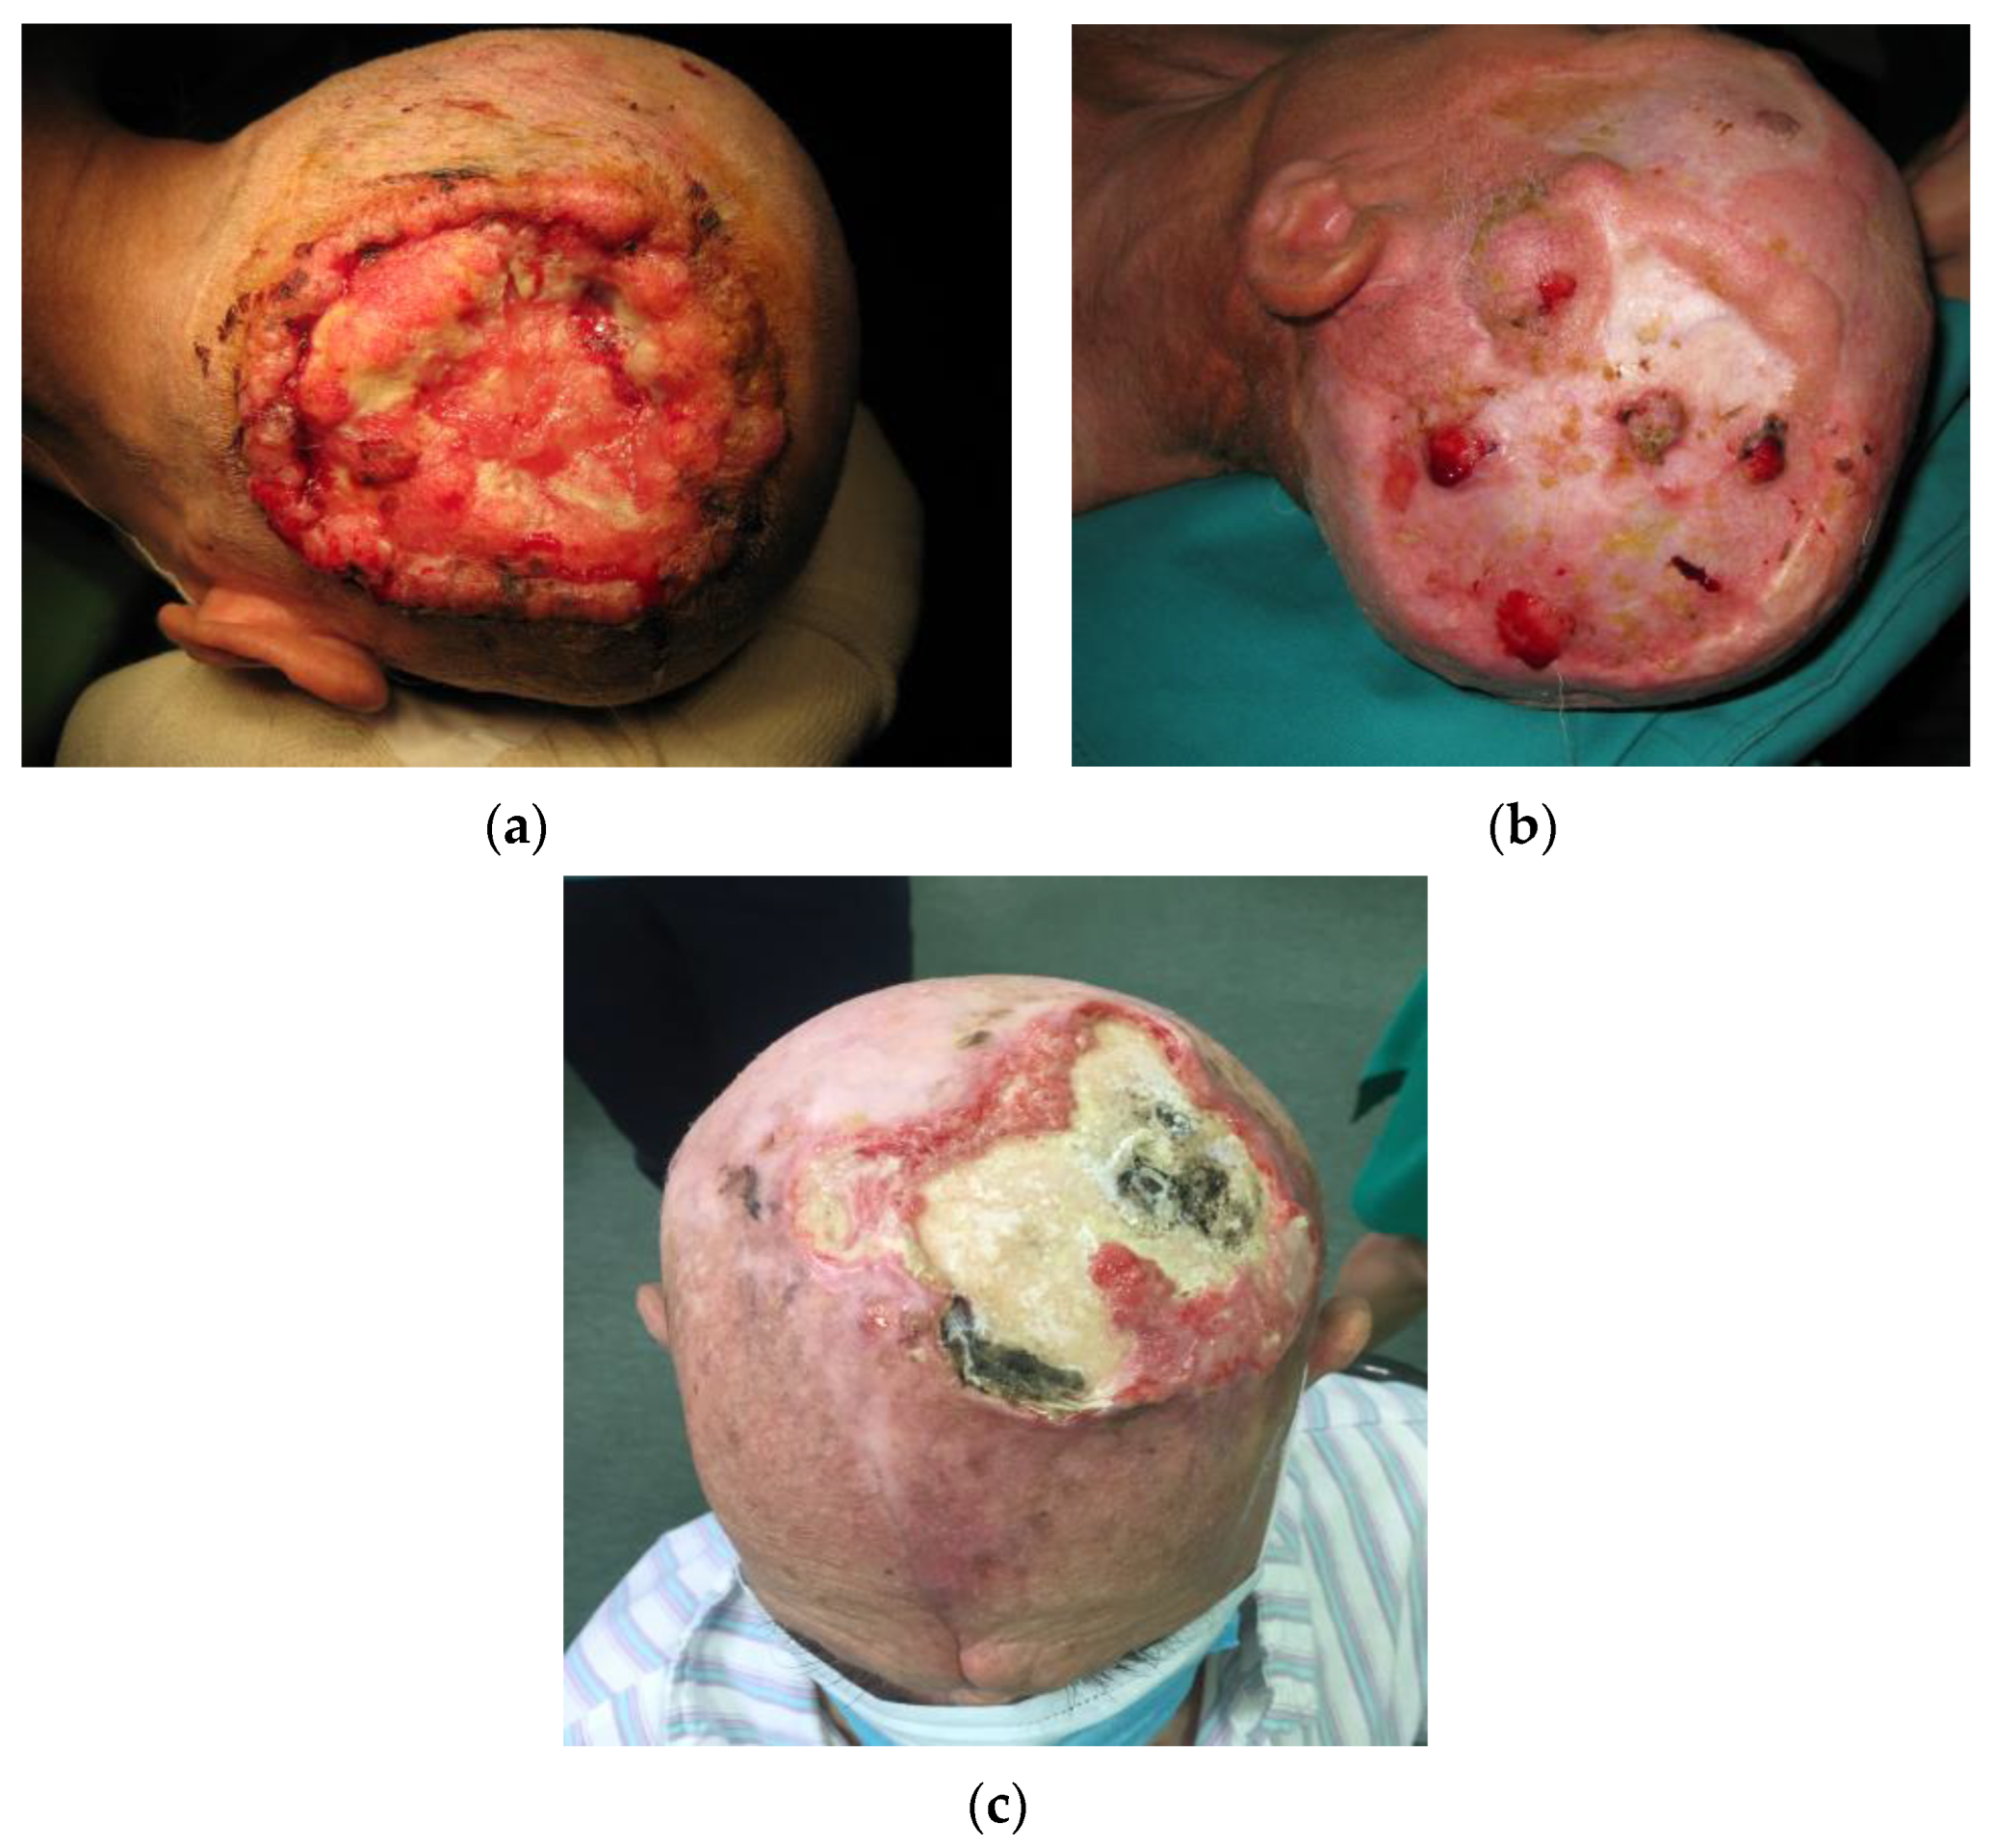 Ringworm, Scalp (Tinea Capitis) Condition, Treatments and Pictures